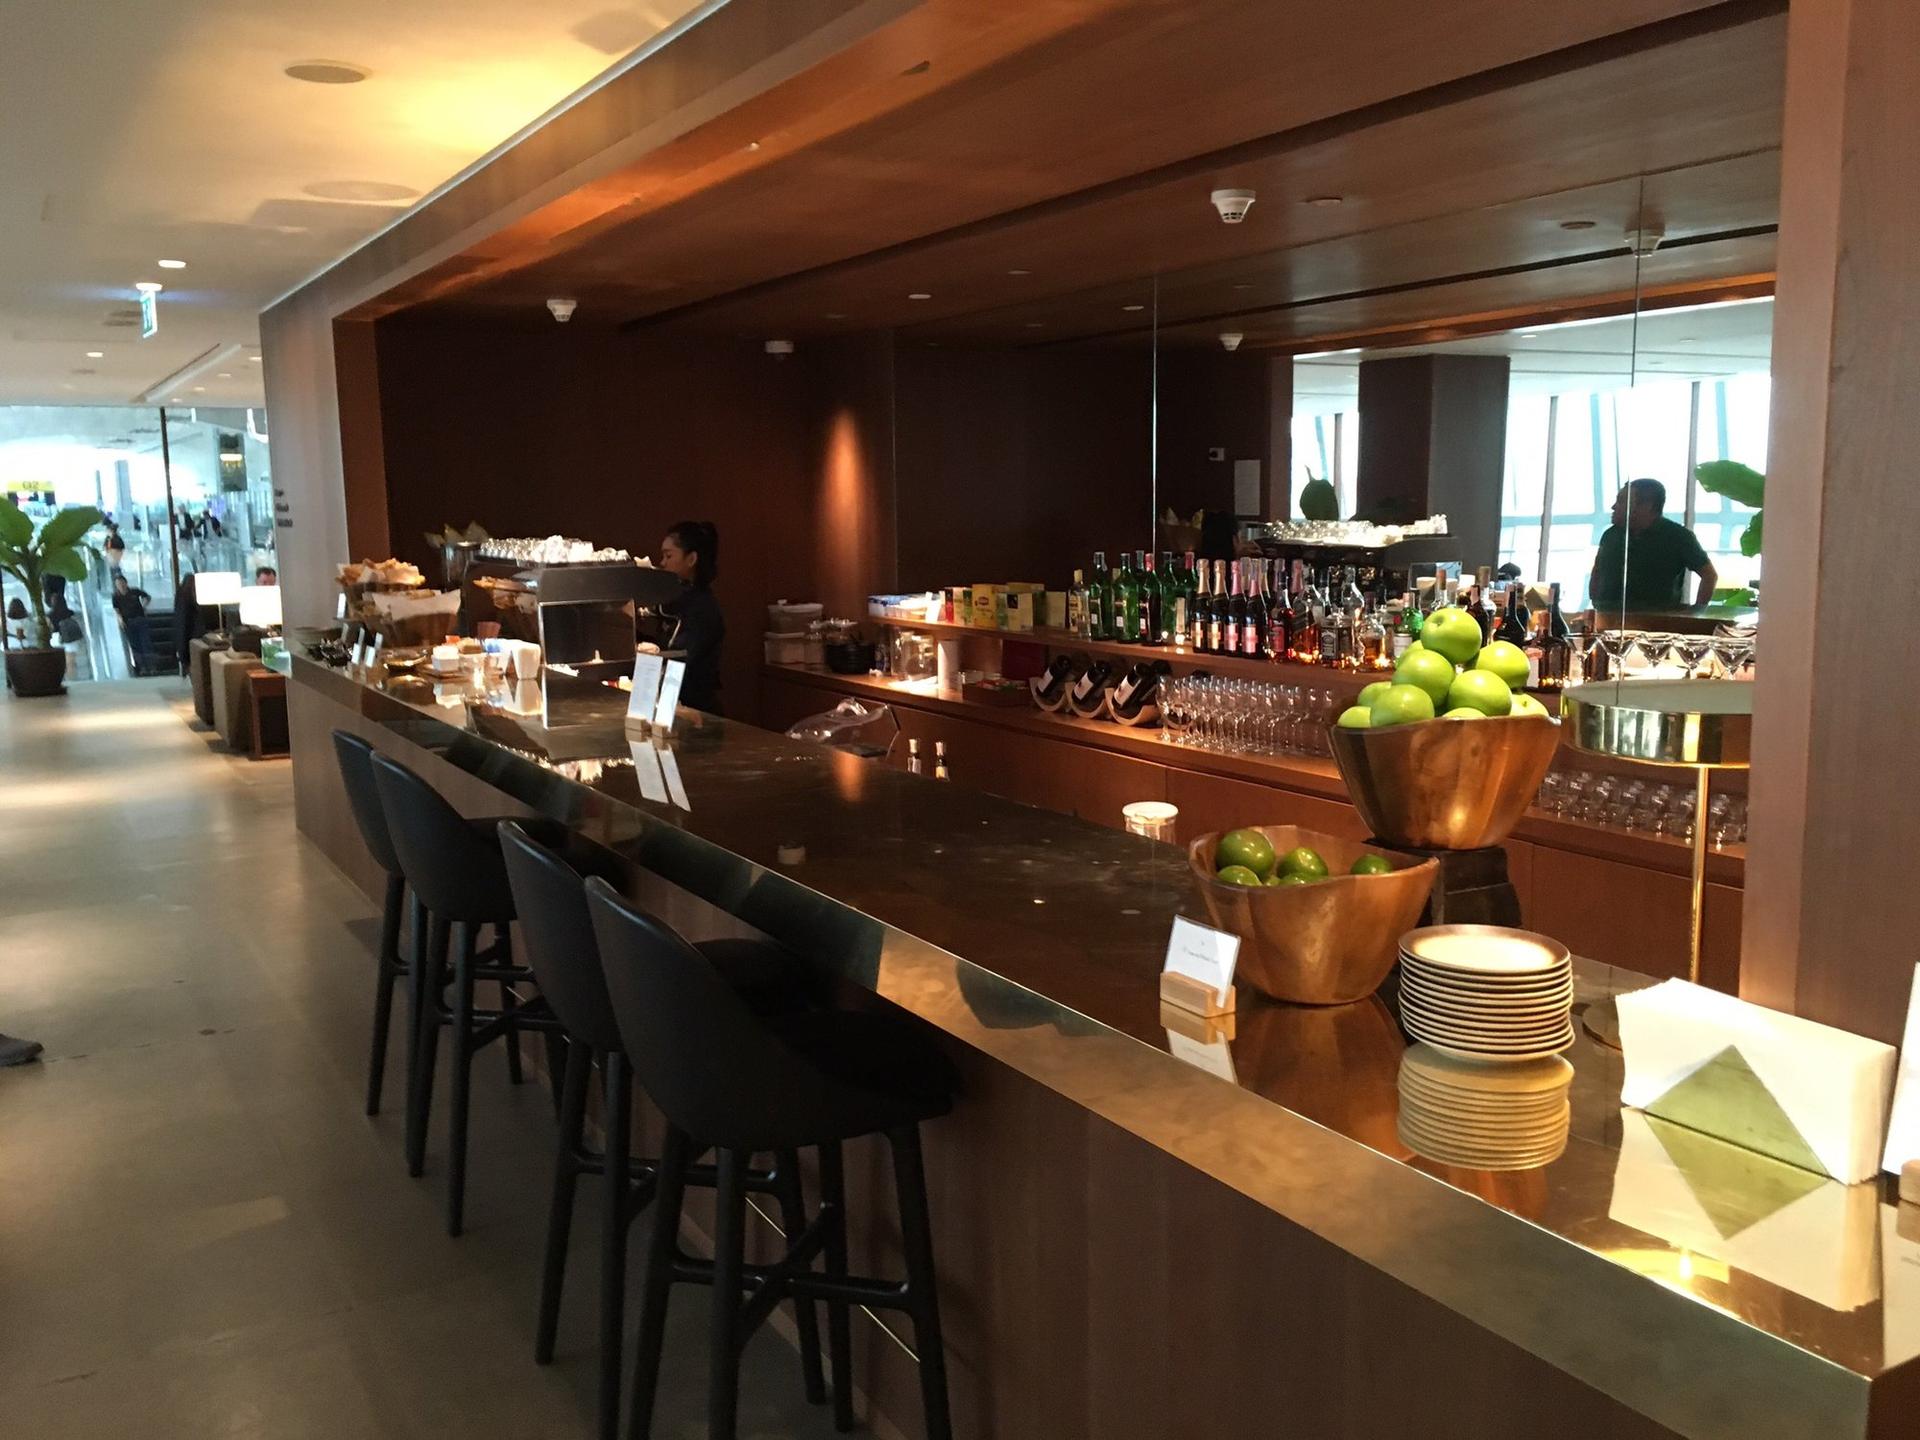 Cathay Pacific First and Business Class Lounge image 12 of 69